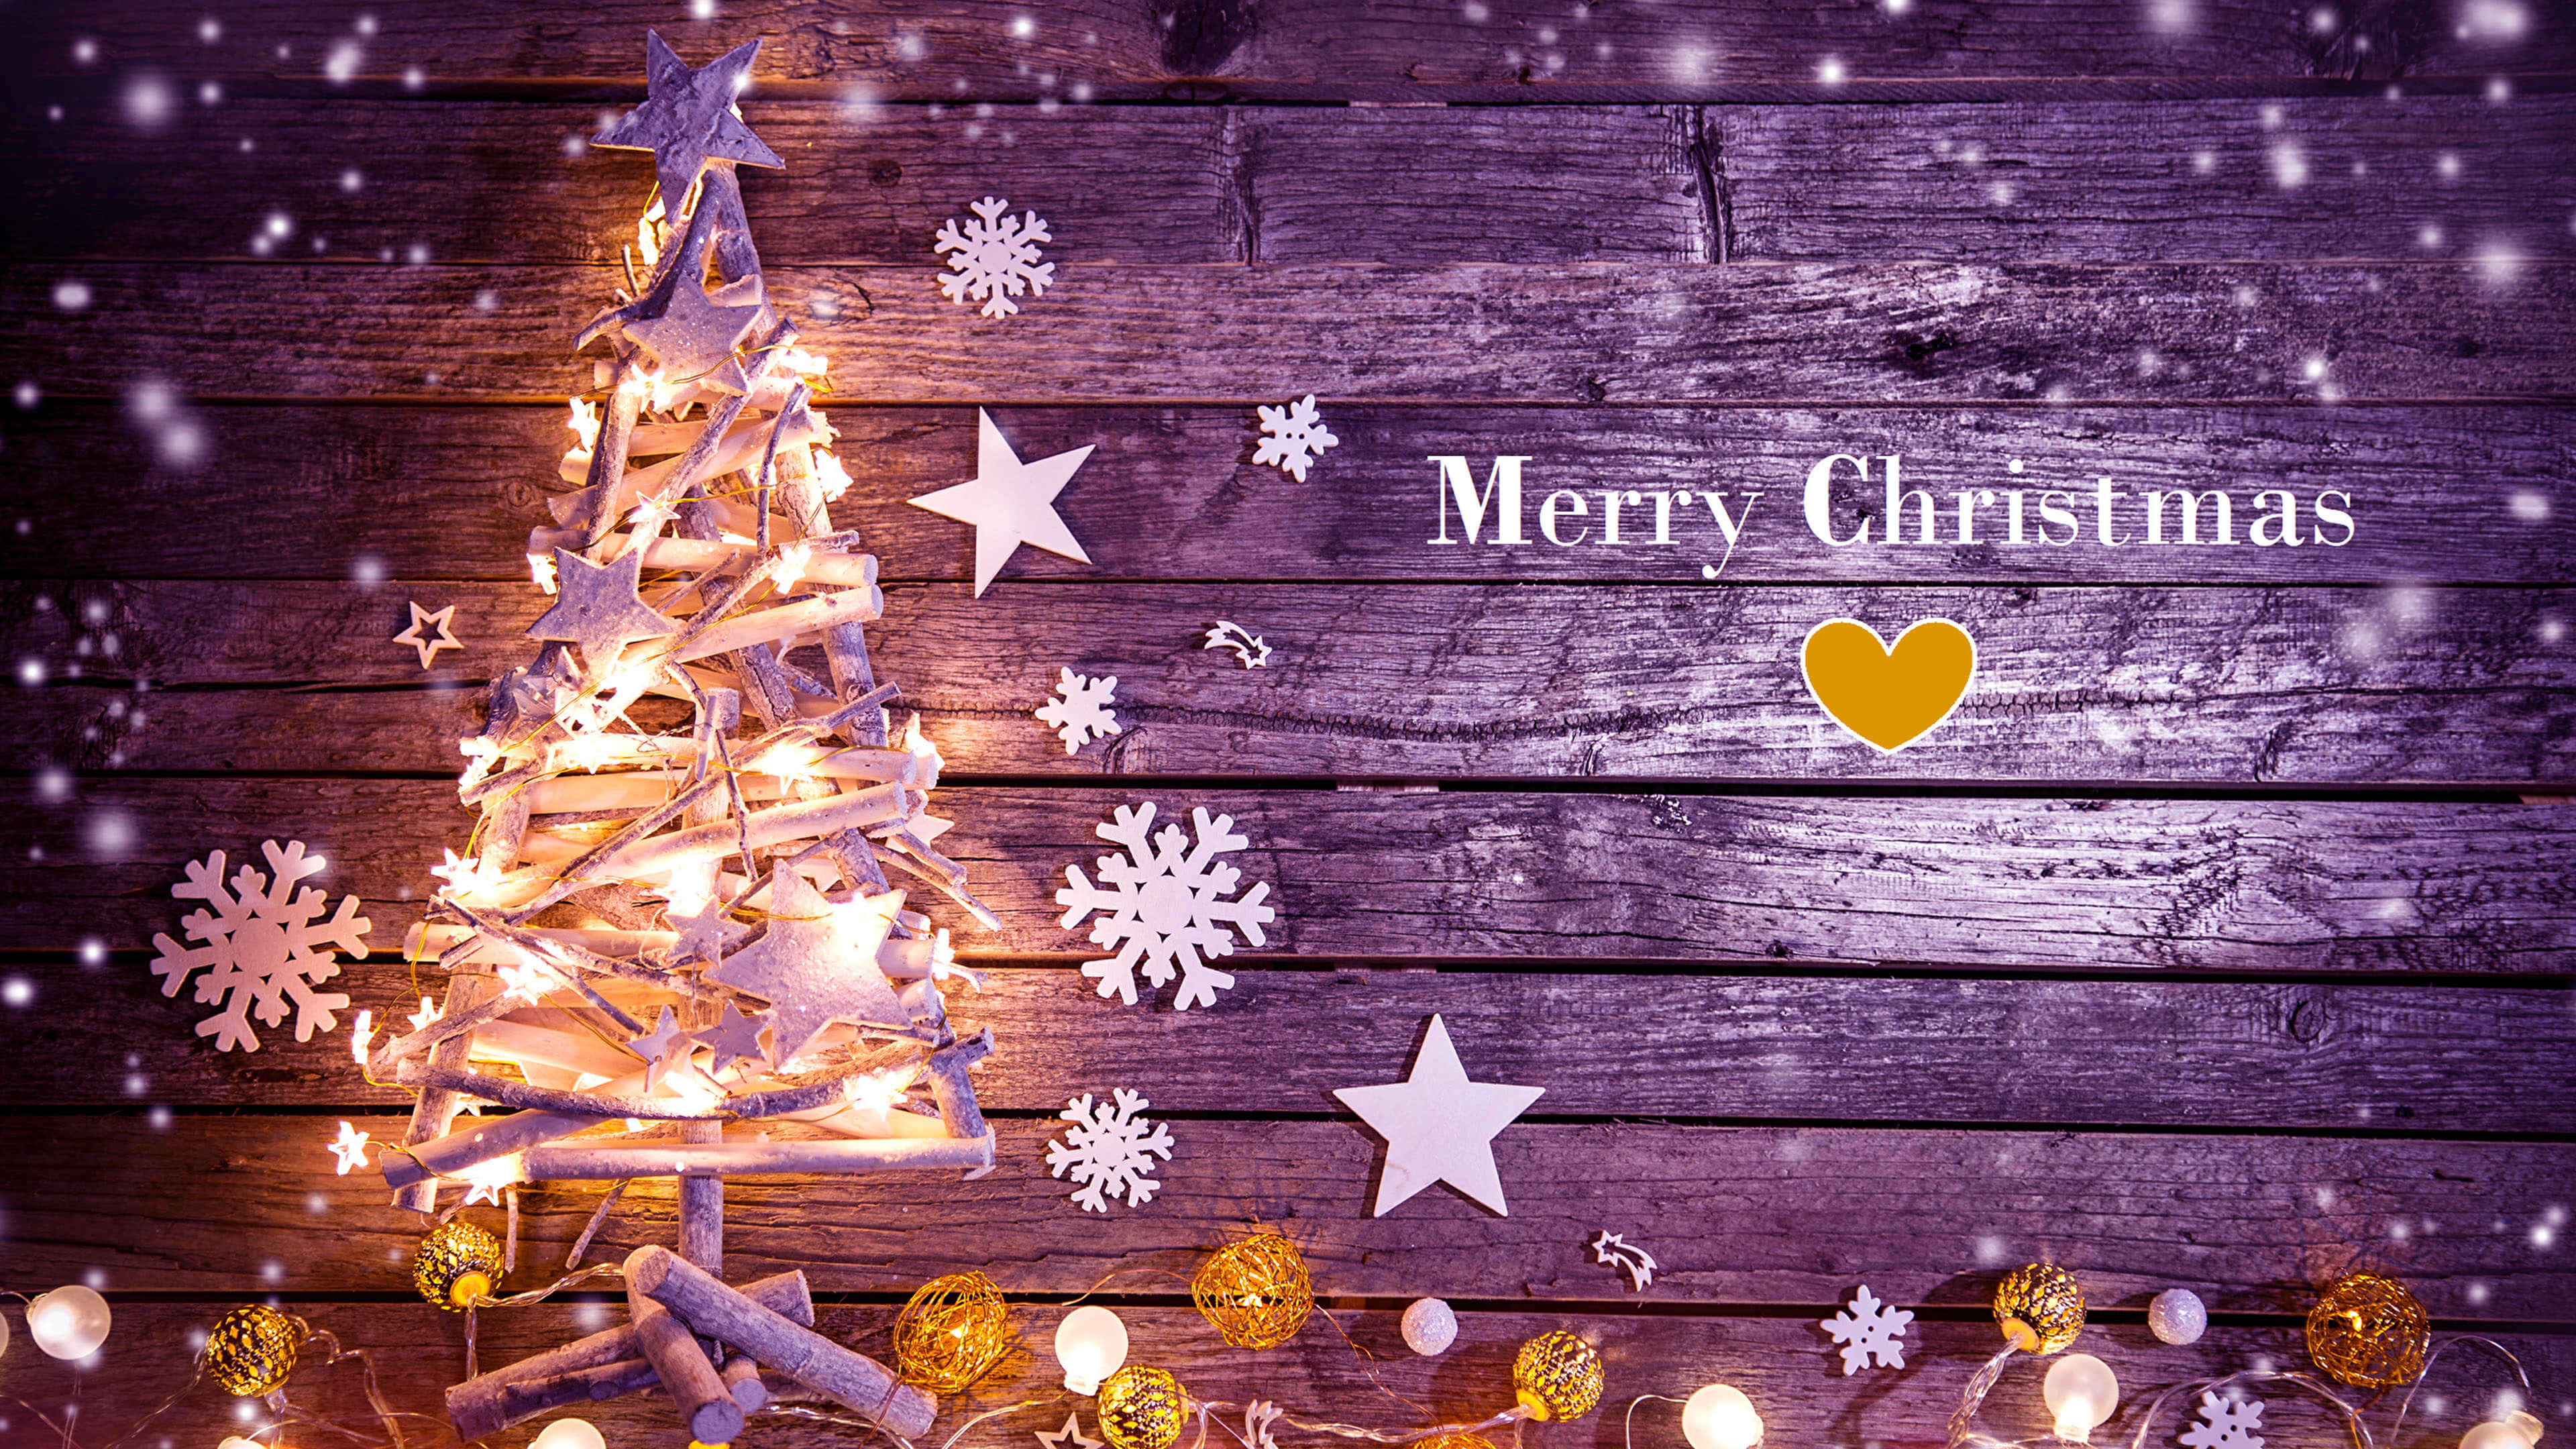 Merry Christmas Wallpapers - Wallpaper Cave